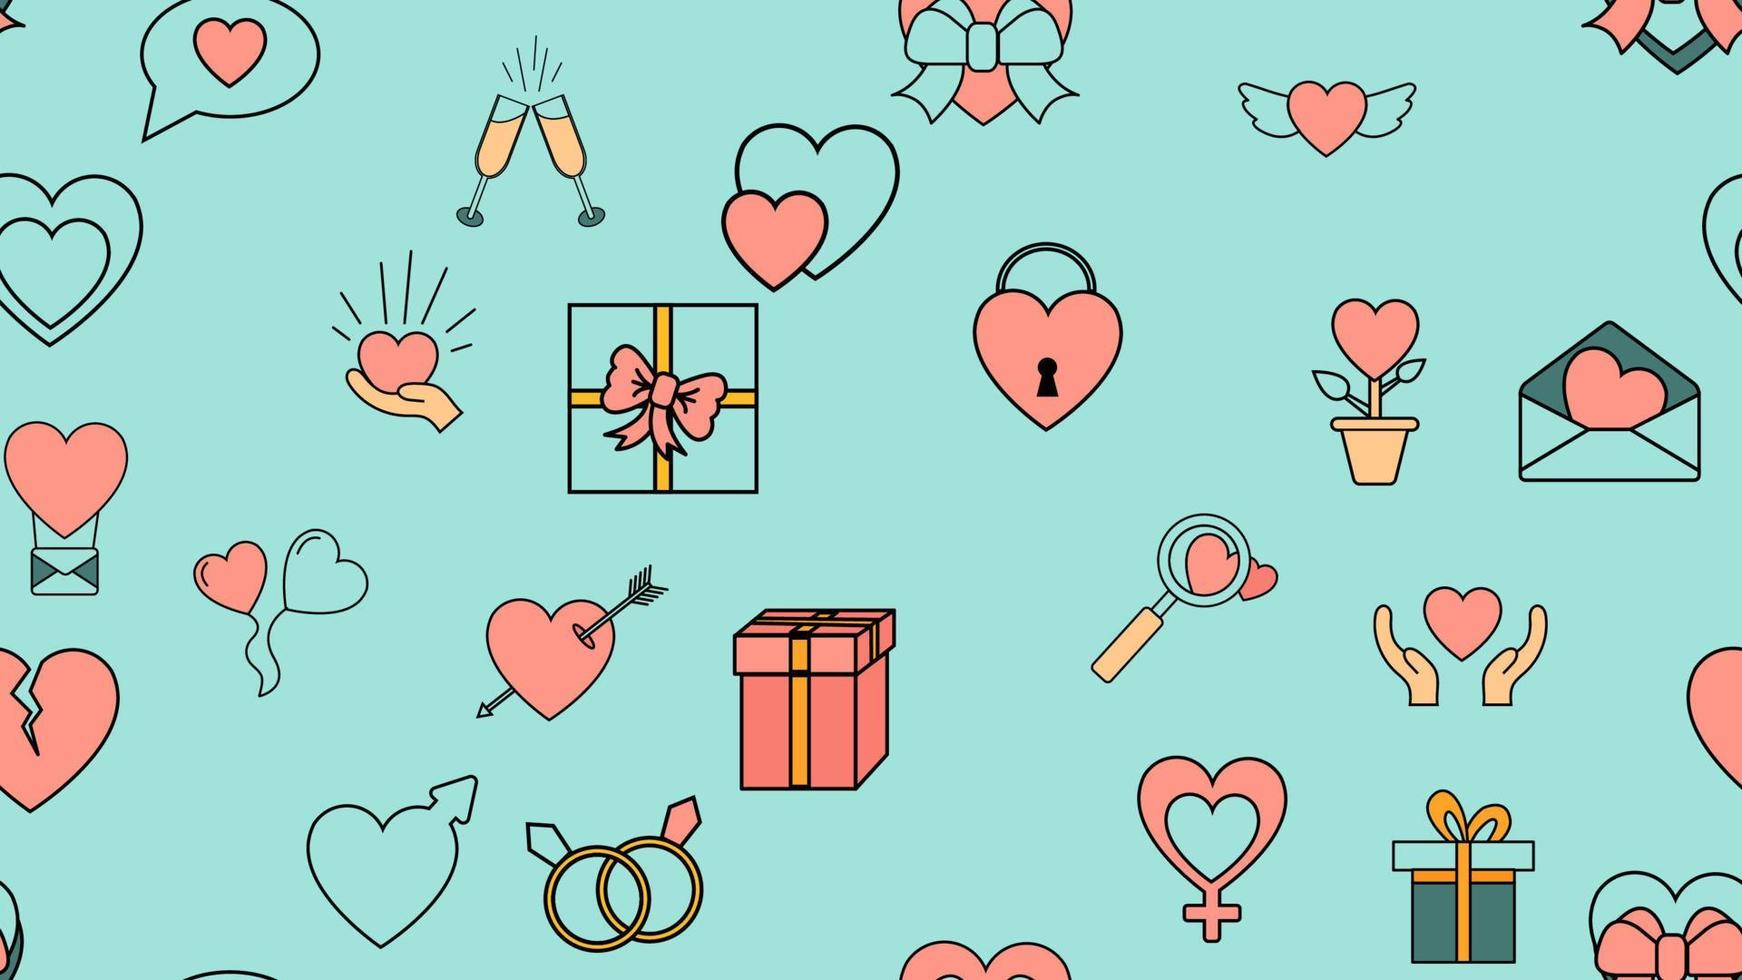 Texture seamless pattern from a set of love items with hearts and gifts for the holiday of love Valentine's Day February 14 or March 8 on a blue background. Vector illustration